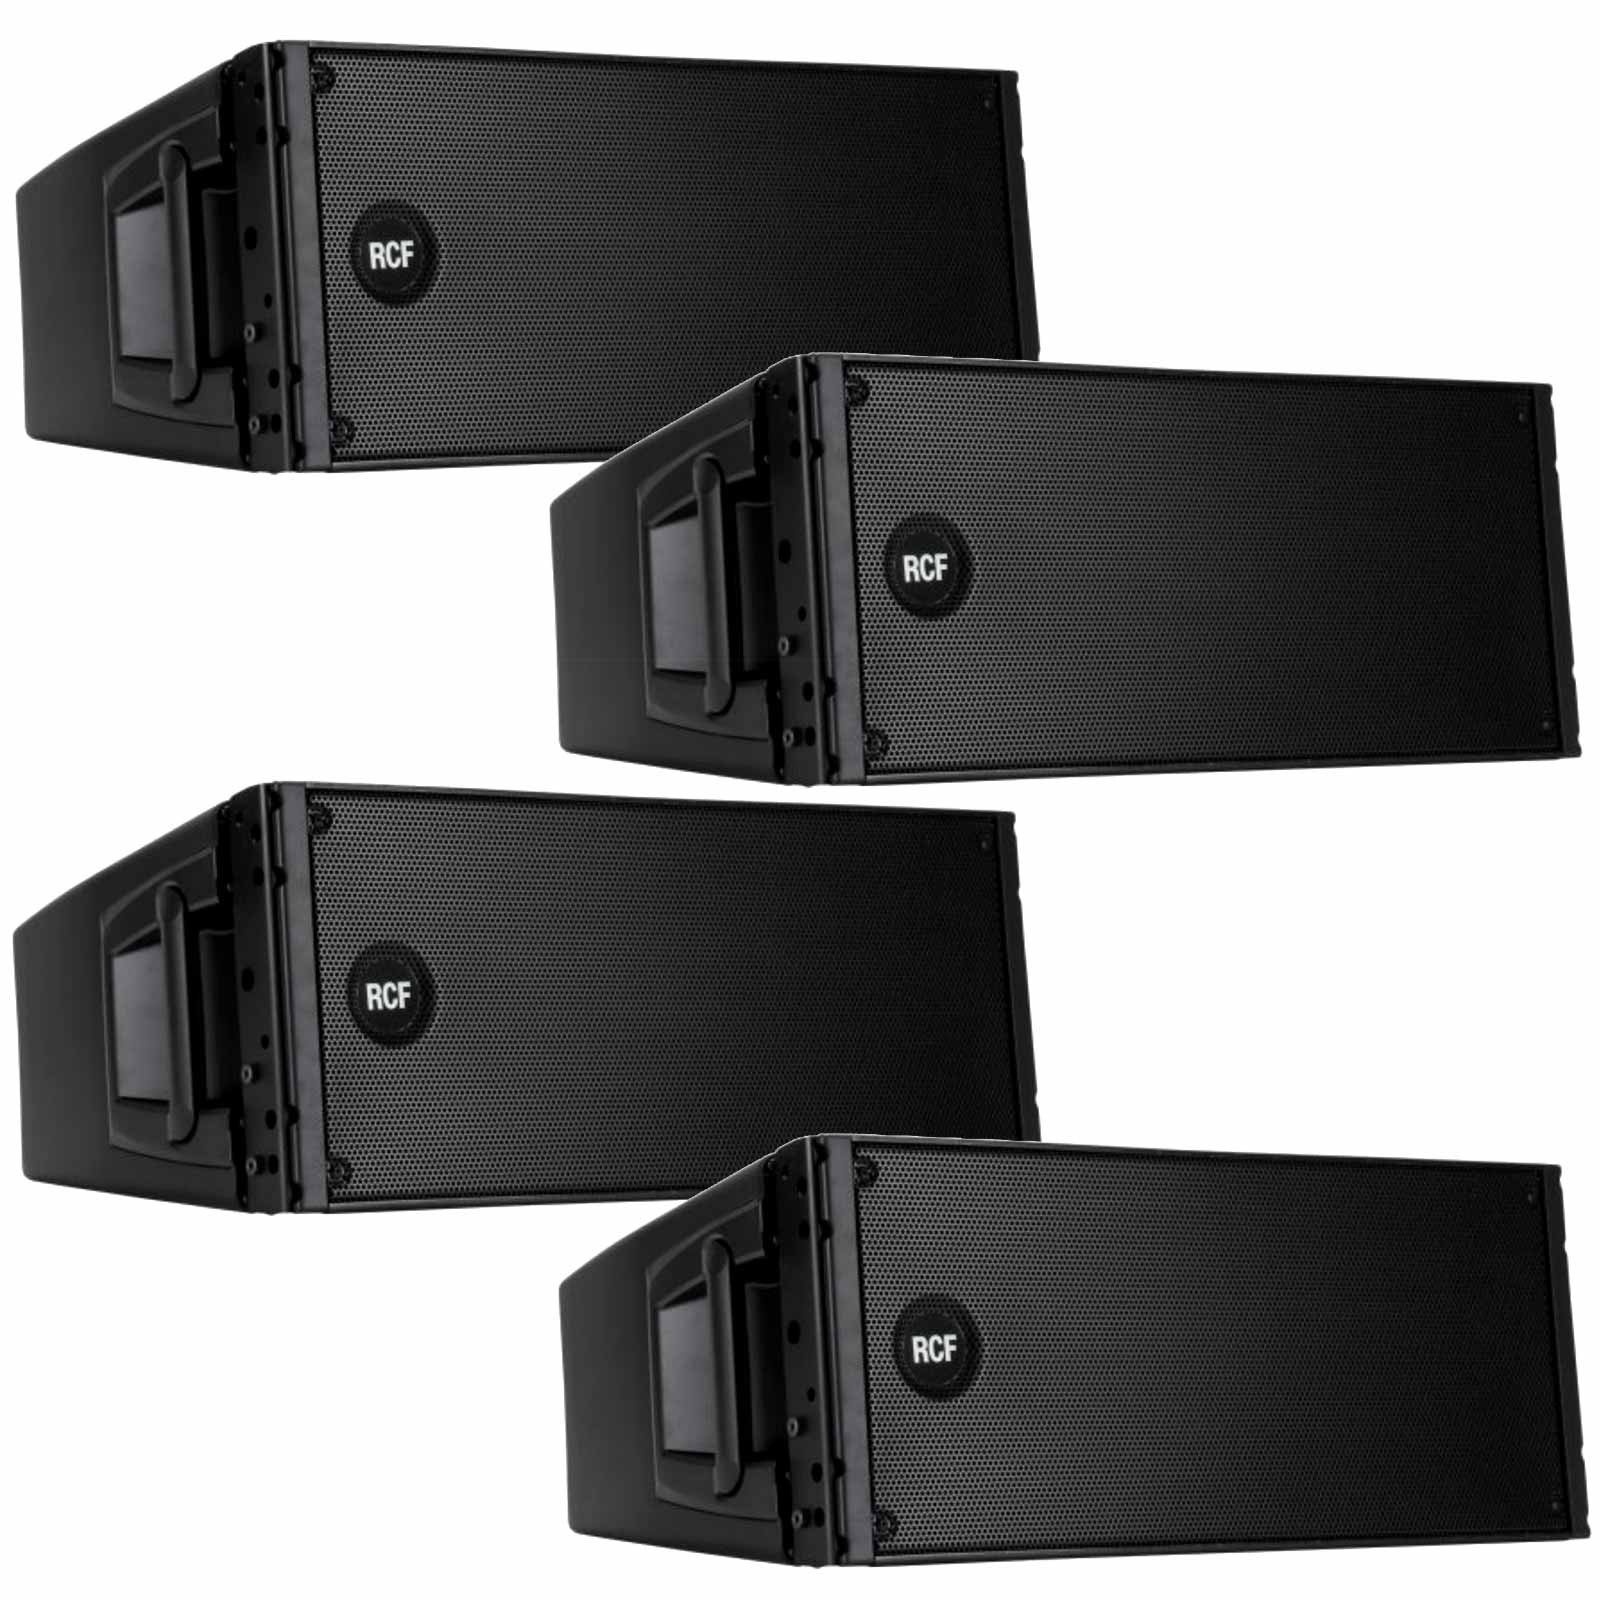 4-rcf-hdl-20-a-active-line-array-module-speakers-package-096